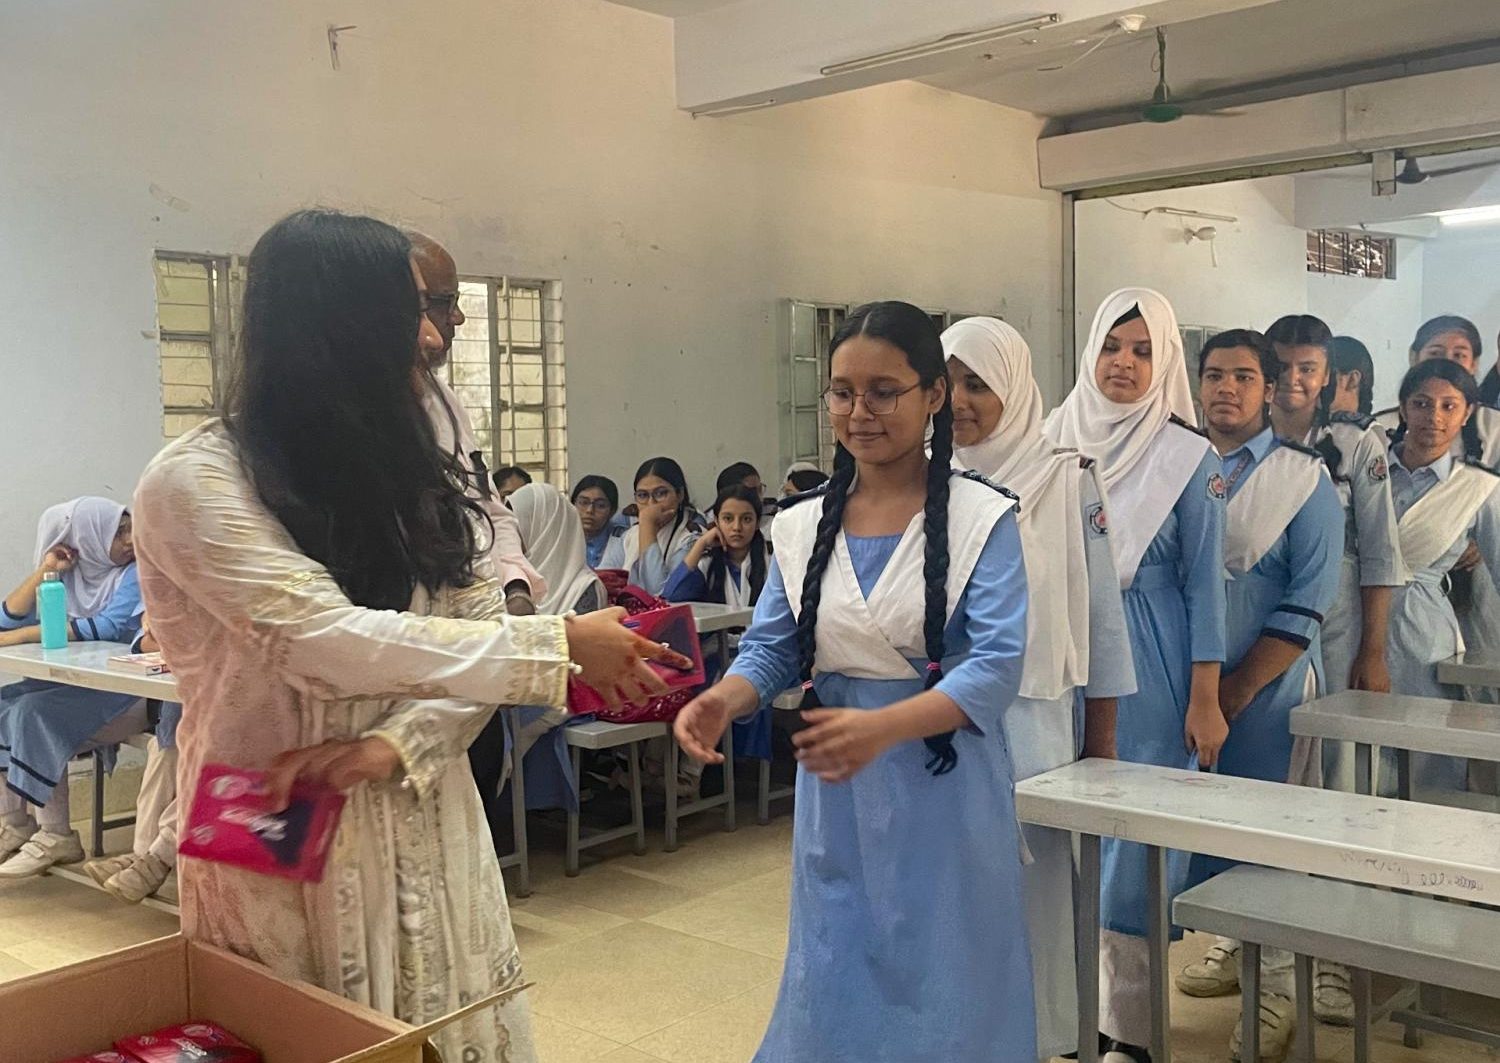 Co-Founder Rose Rosaleen distributes period products for school girls at the Hazaribagh Girls’ Public High School in Dhaka, Bangladesh.